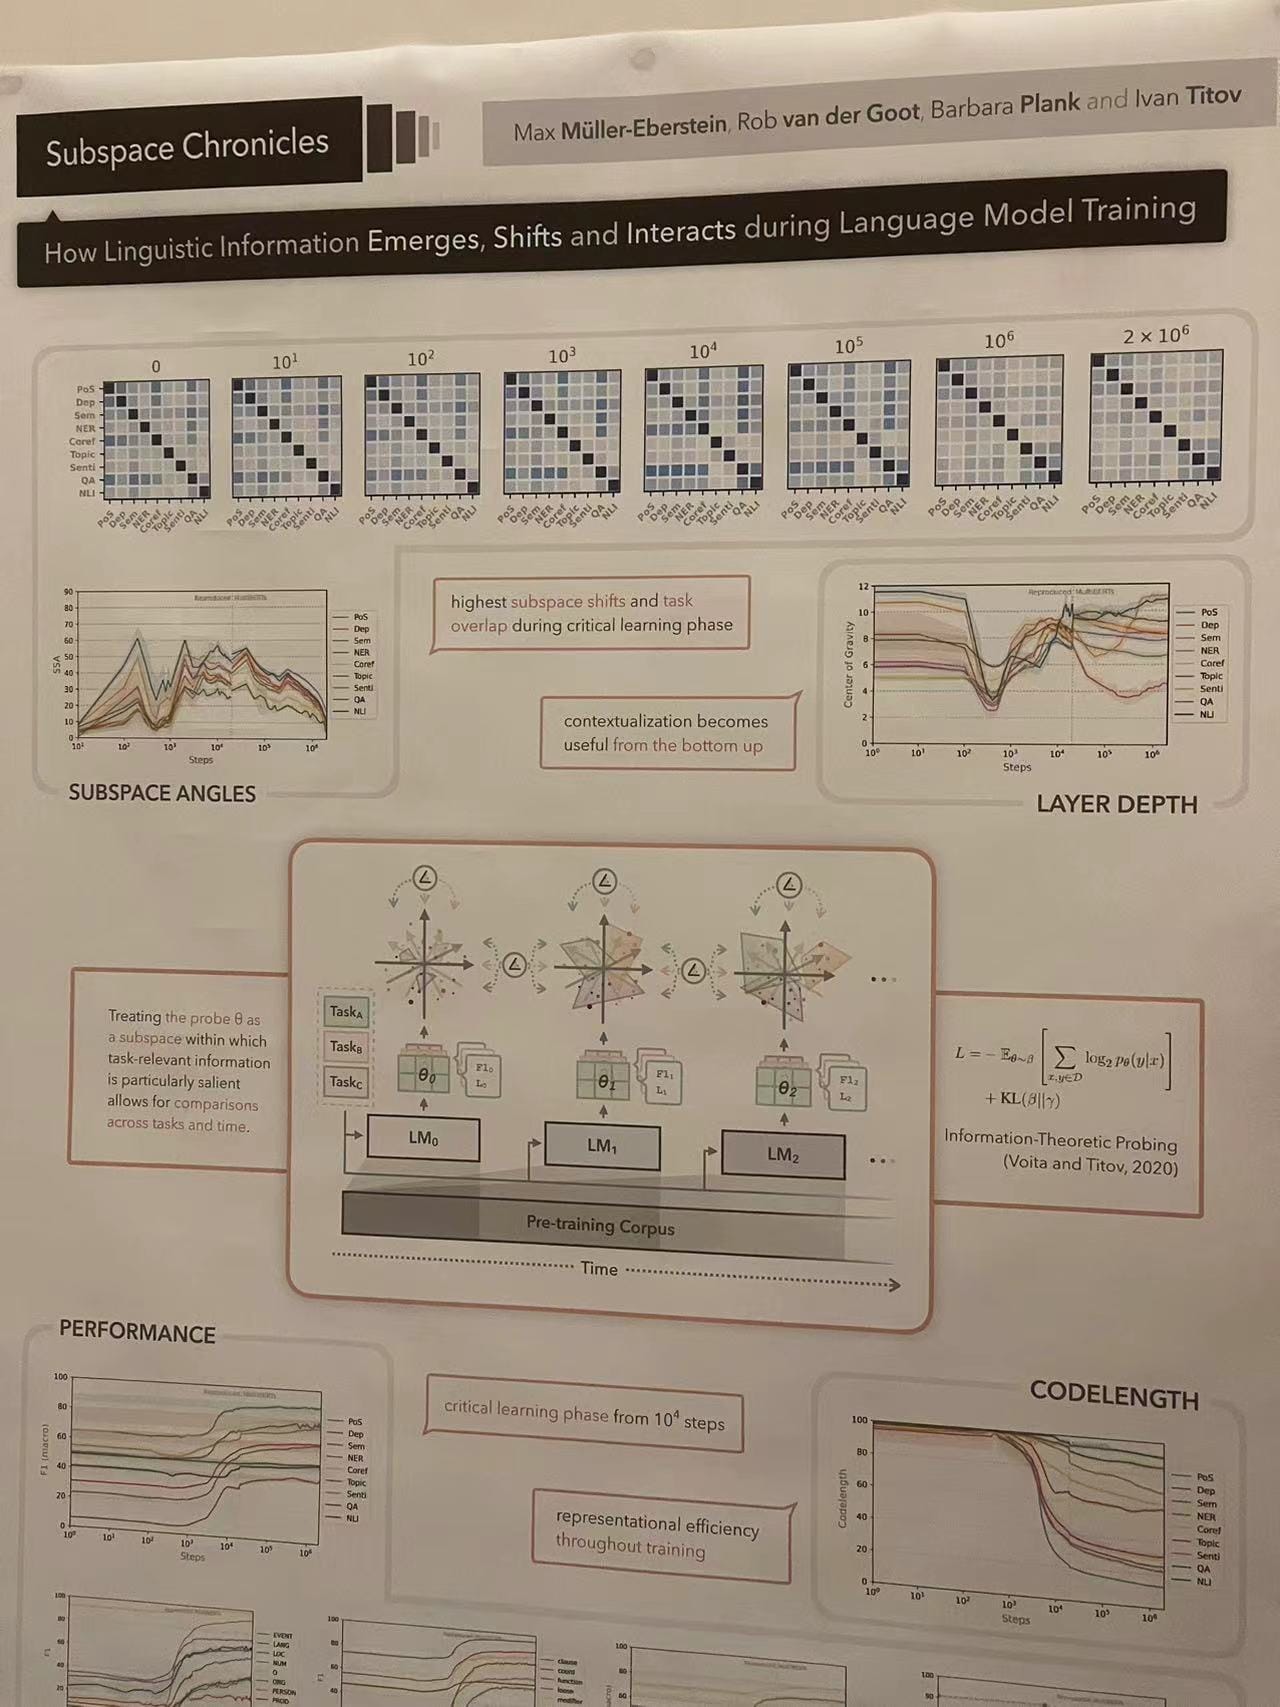 Scientific poster titled "Subspace Chronicles," detailing linguistic shifts during language model training with graphs like Subspace Angles and Layer Depth